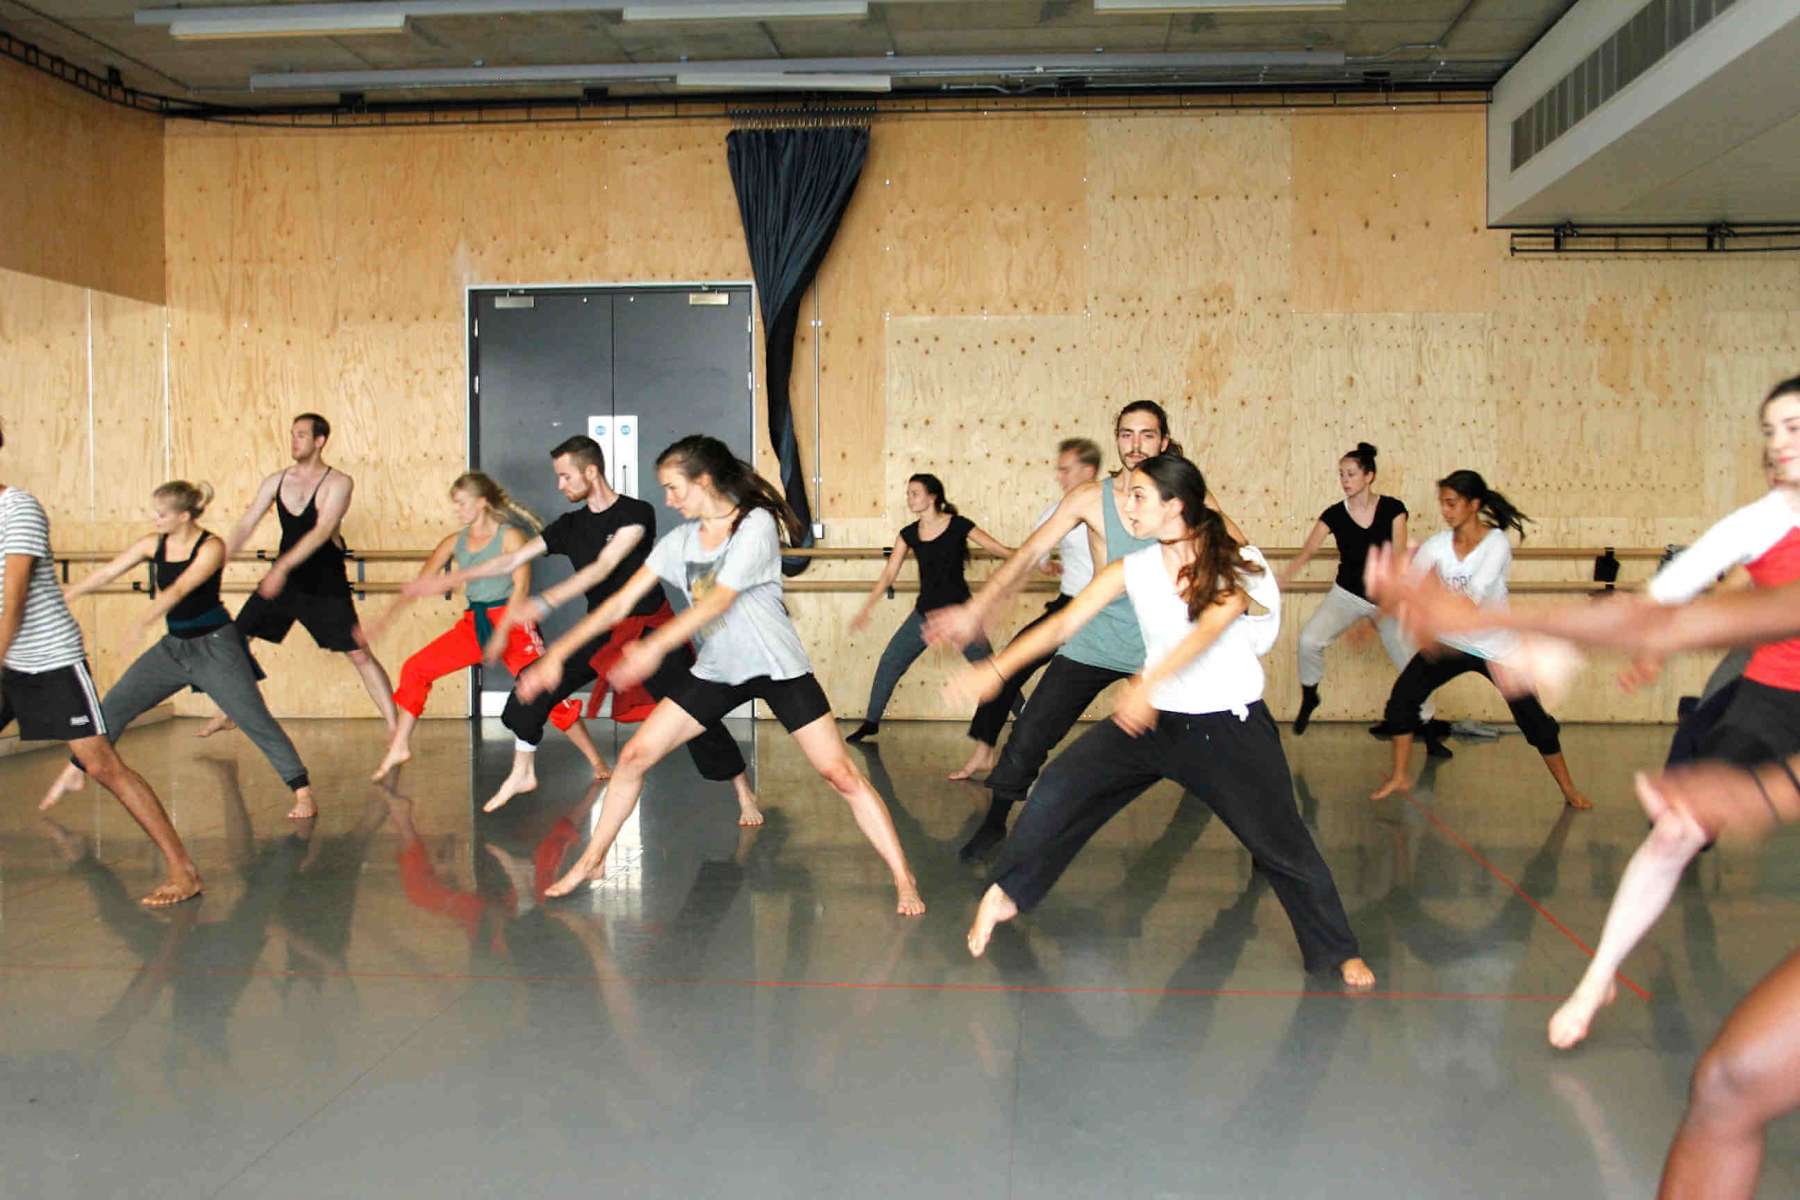 A group of dancers moving together in a studio